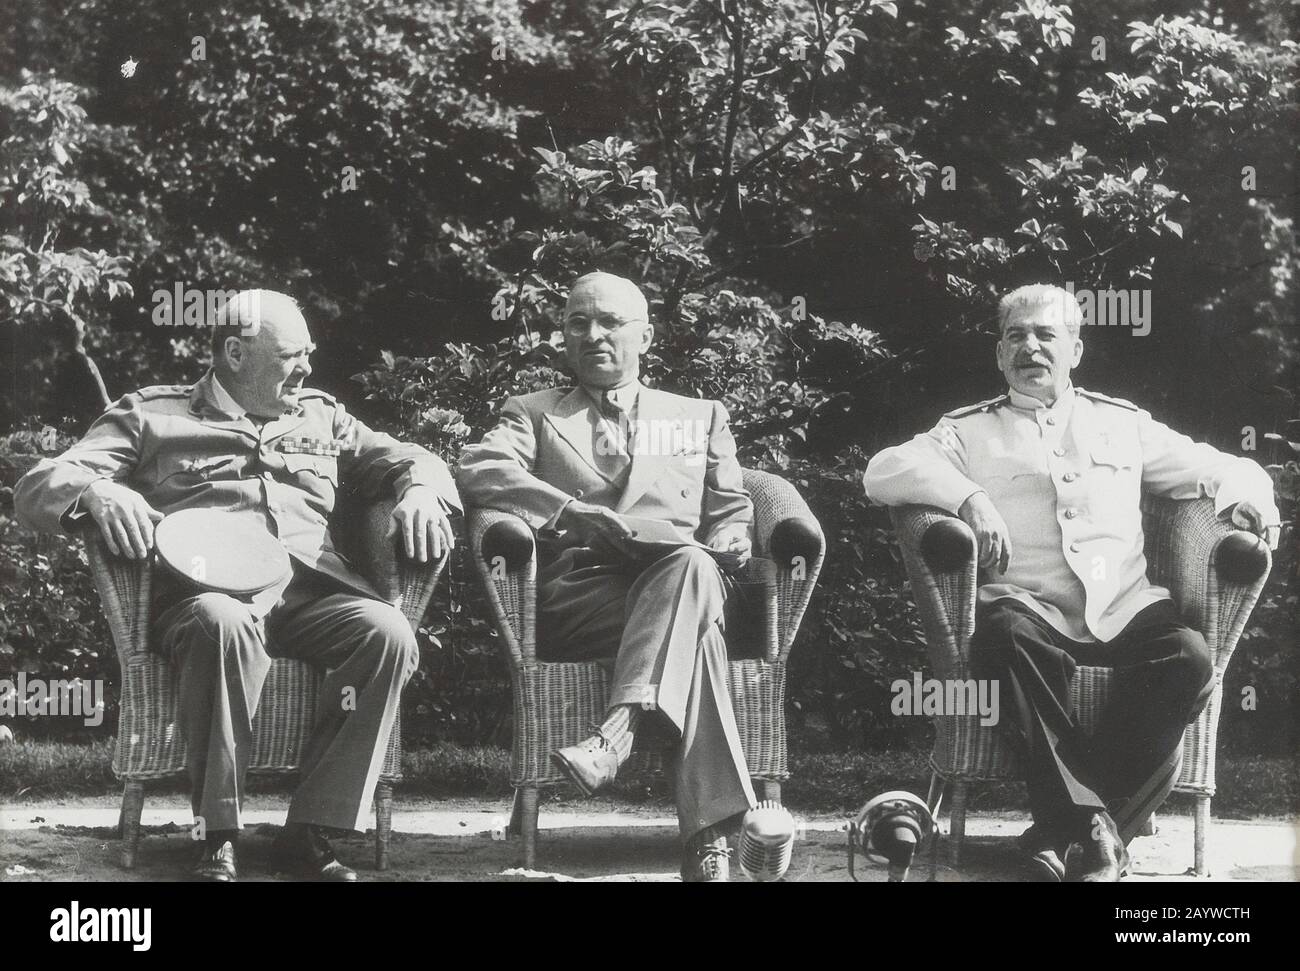 Winston Churchill, Harry Truman, Joseph Stalin at the Potsdam Conference, July 1945. Museum: PRIVATE COLLECTION. Author: Yevgeny Khaldei. Stock Photo